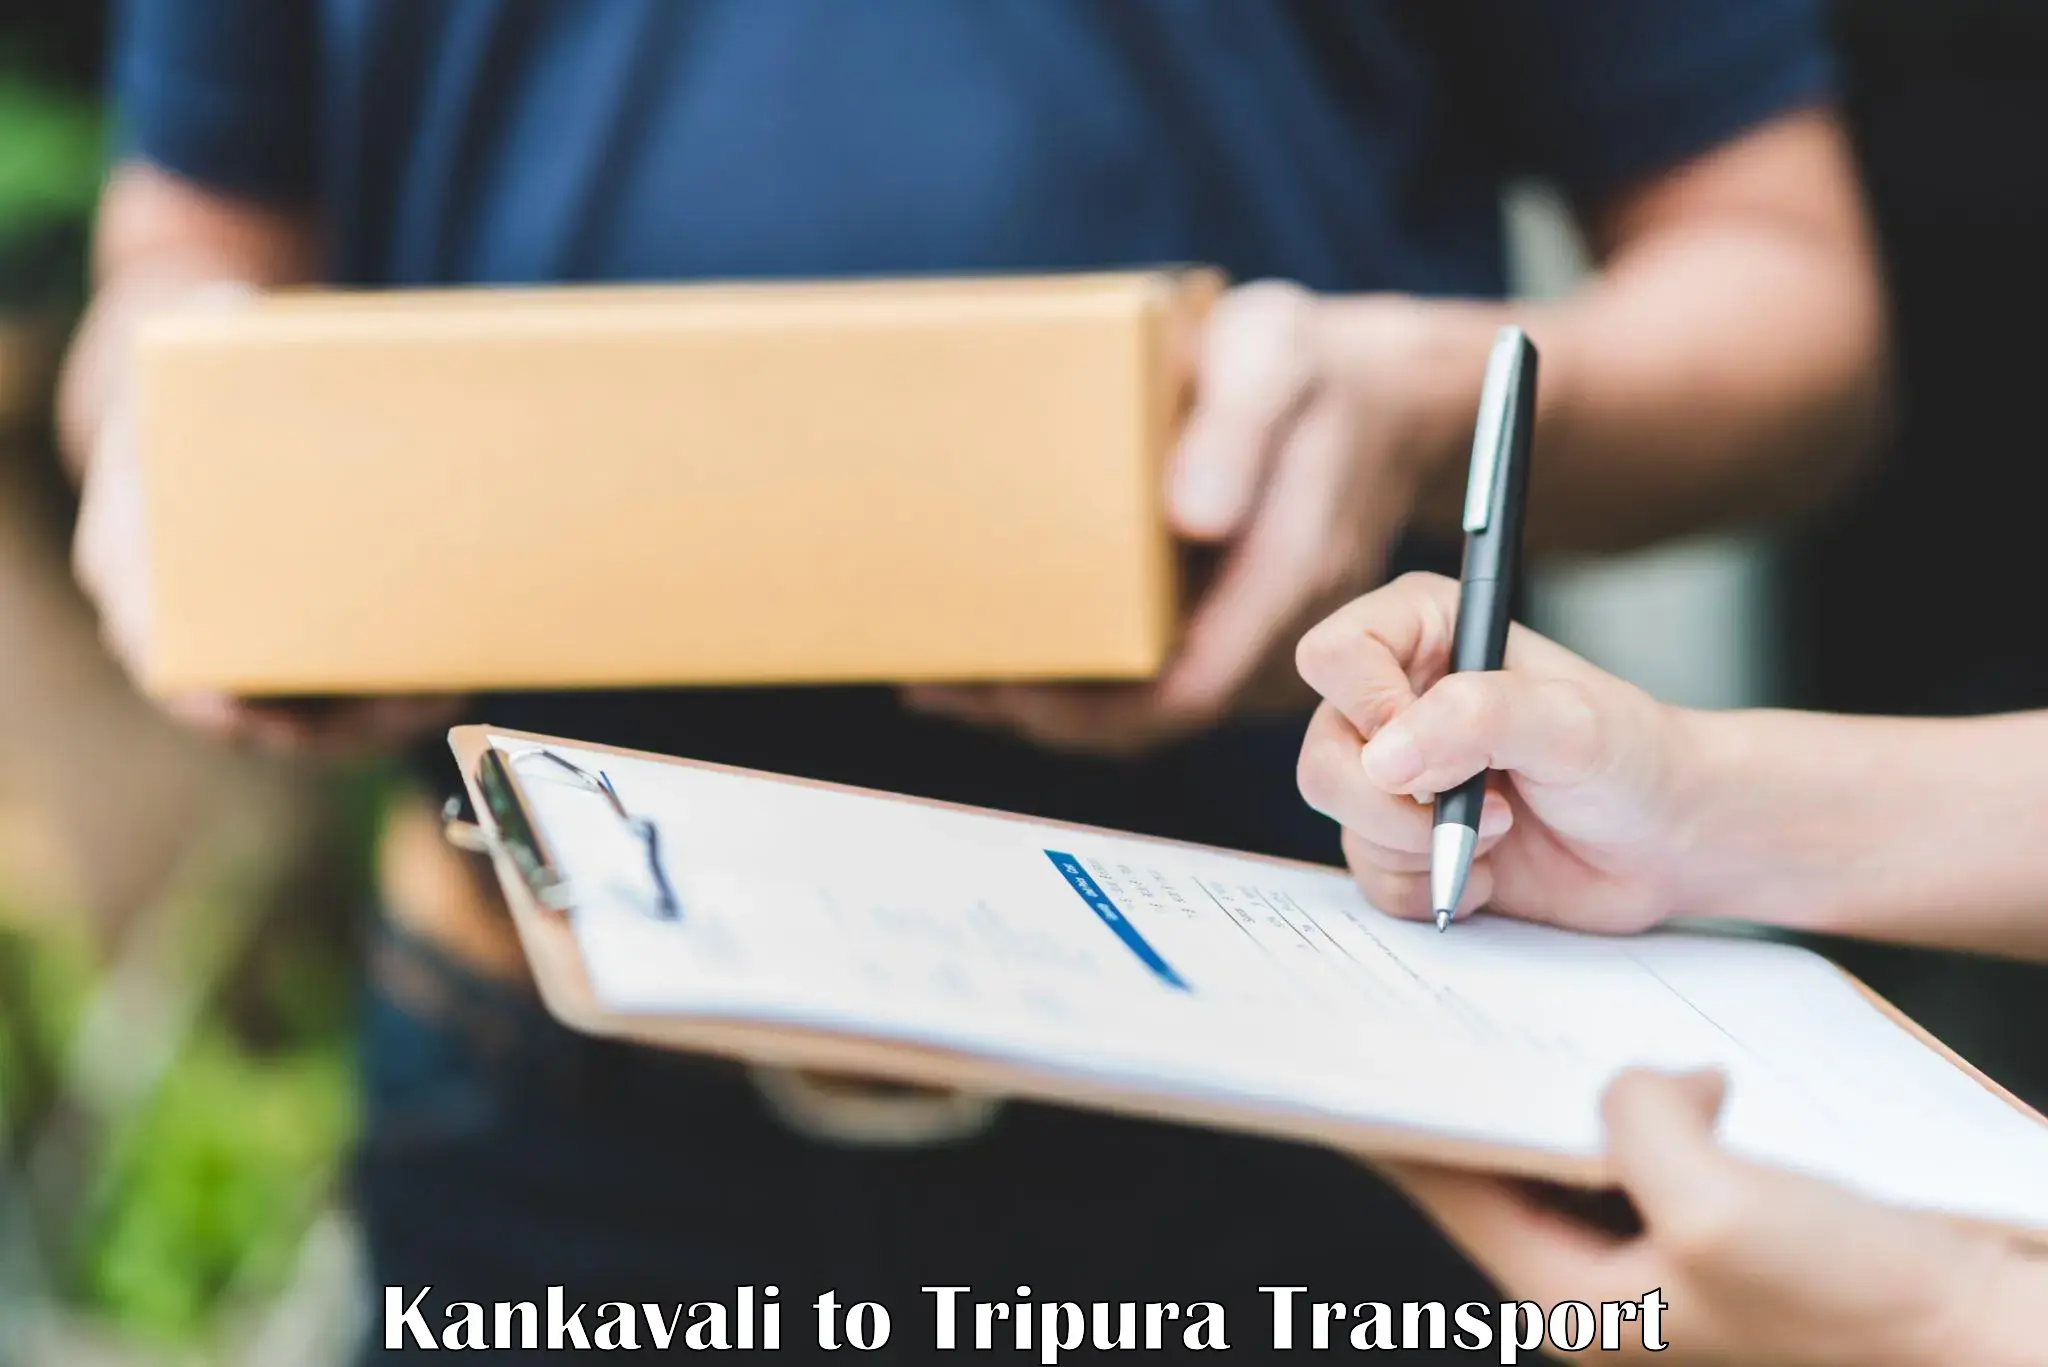 Delivery service Kankavali to Udaipur Tripura